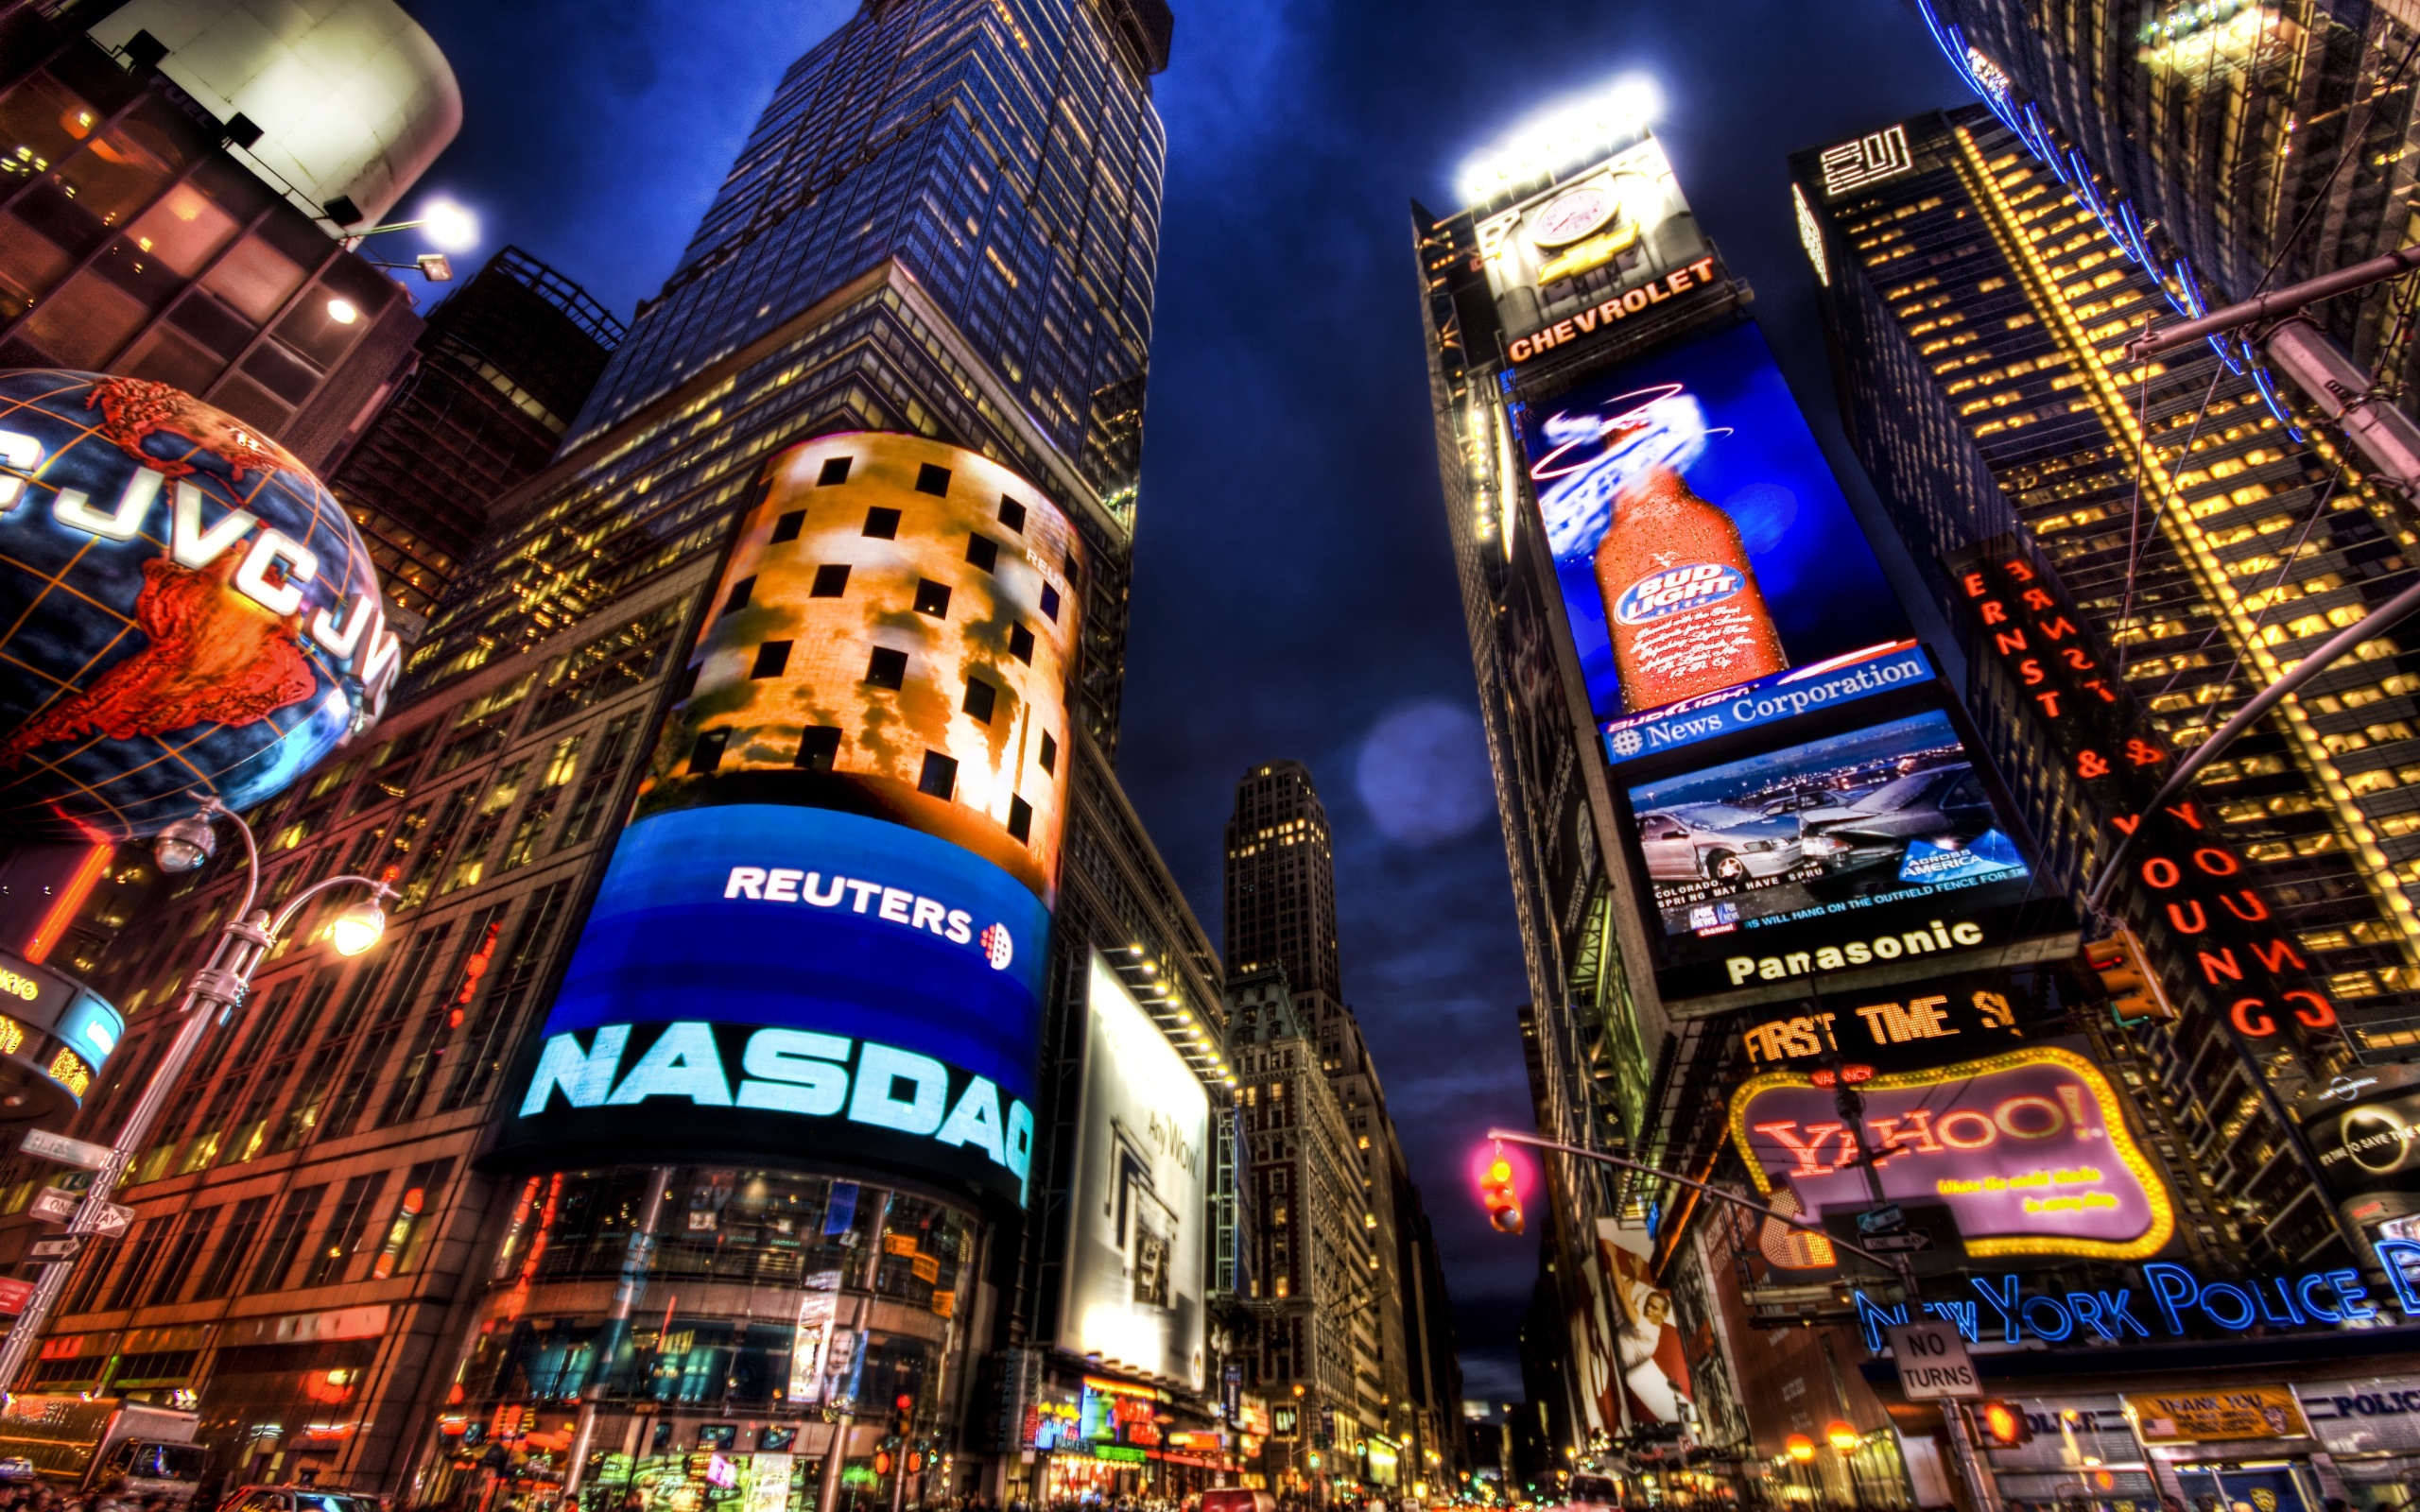 cityscapes, night, architecture, buildings, New York City, skyscrapers, Times Square, advertisement - desktop wallpaper